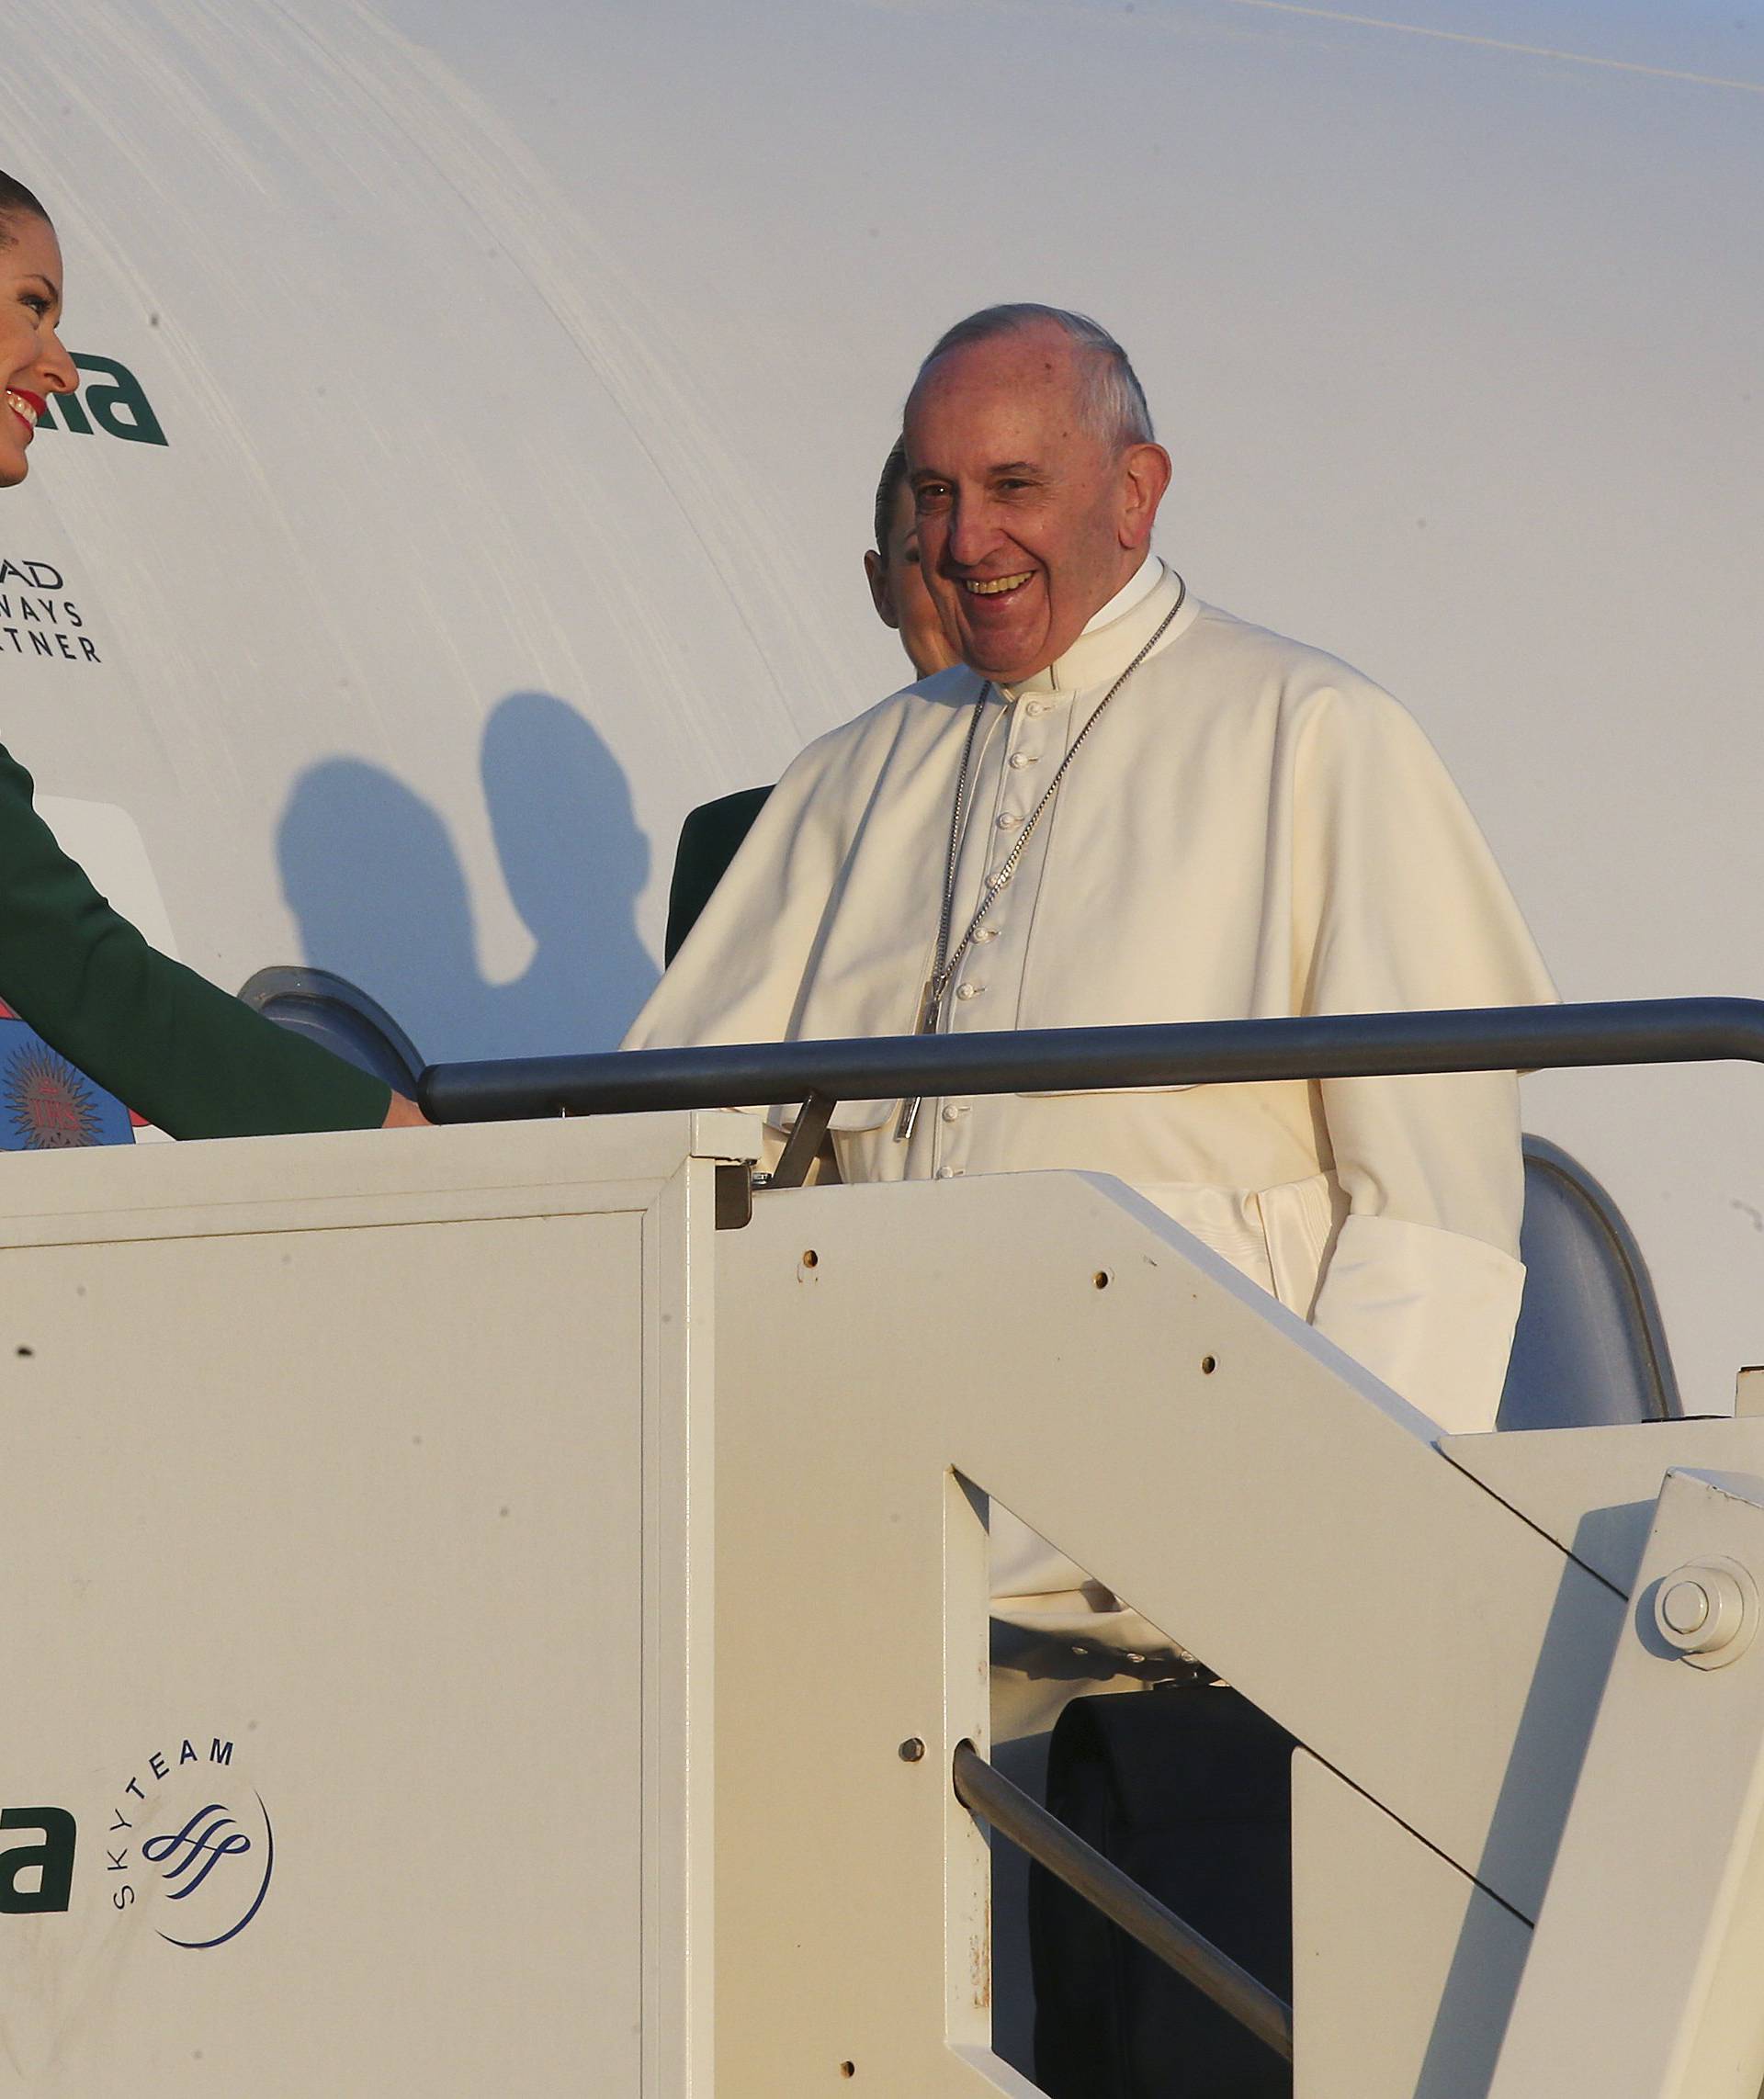 Pope Francis is greeted by a flight attendant as he boards a plane at Fiumicino Airport in Rome